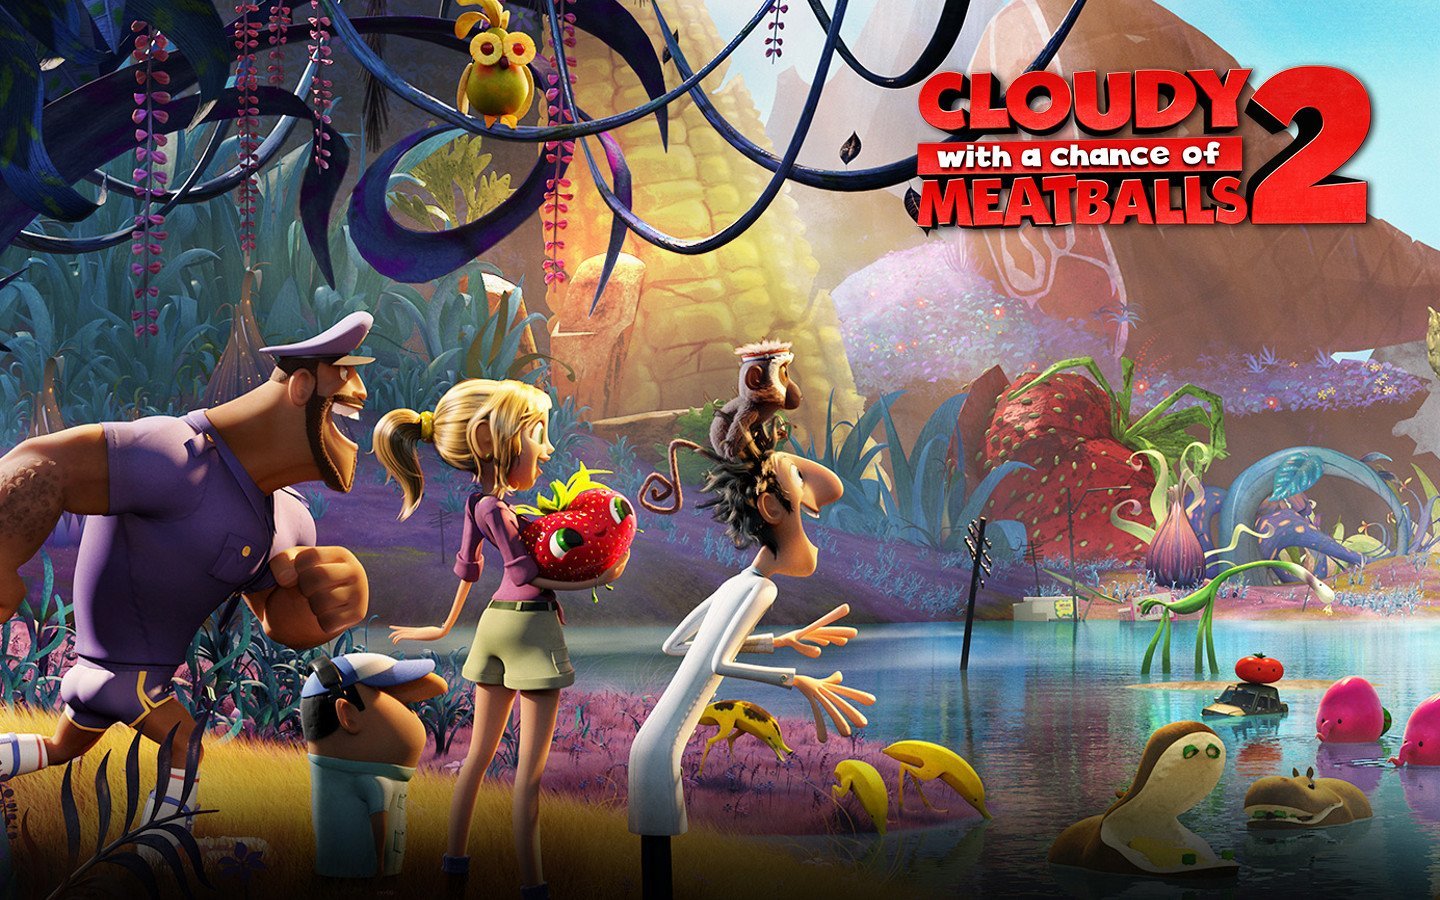 Cloudy with a chance of meatballs full movie in hindi in 3gp